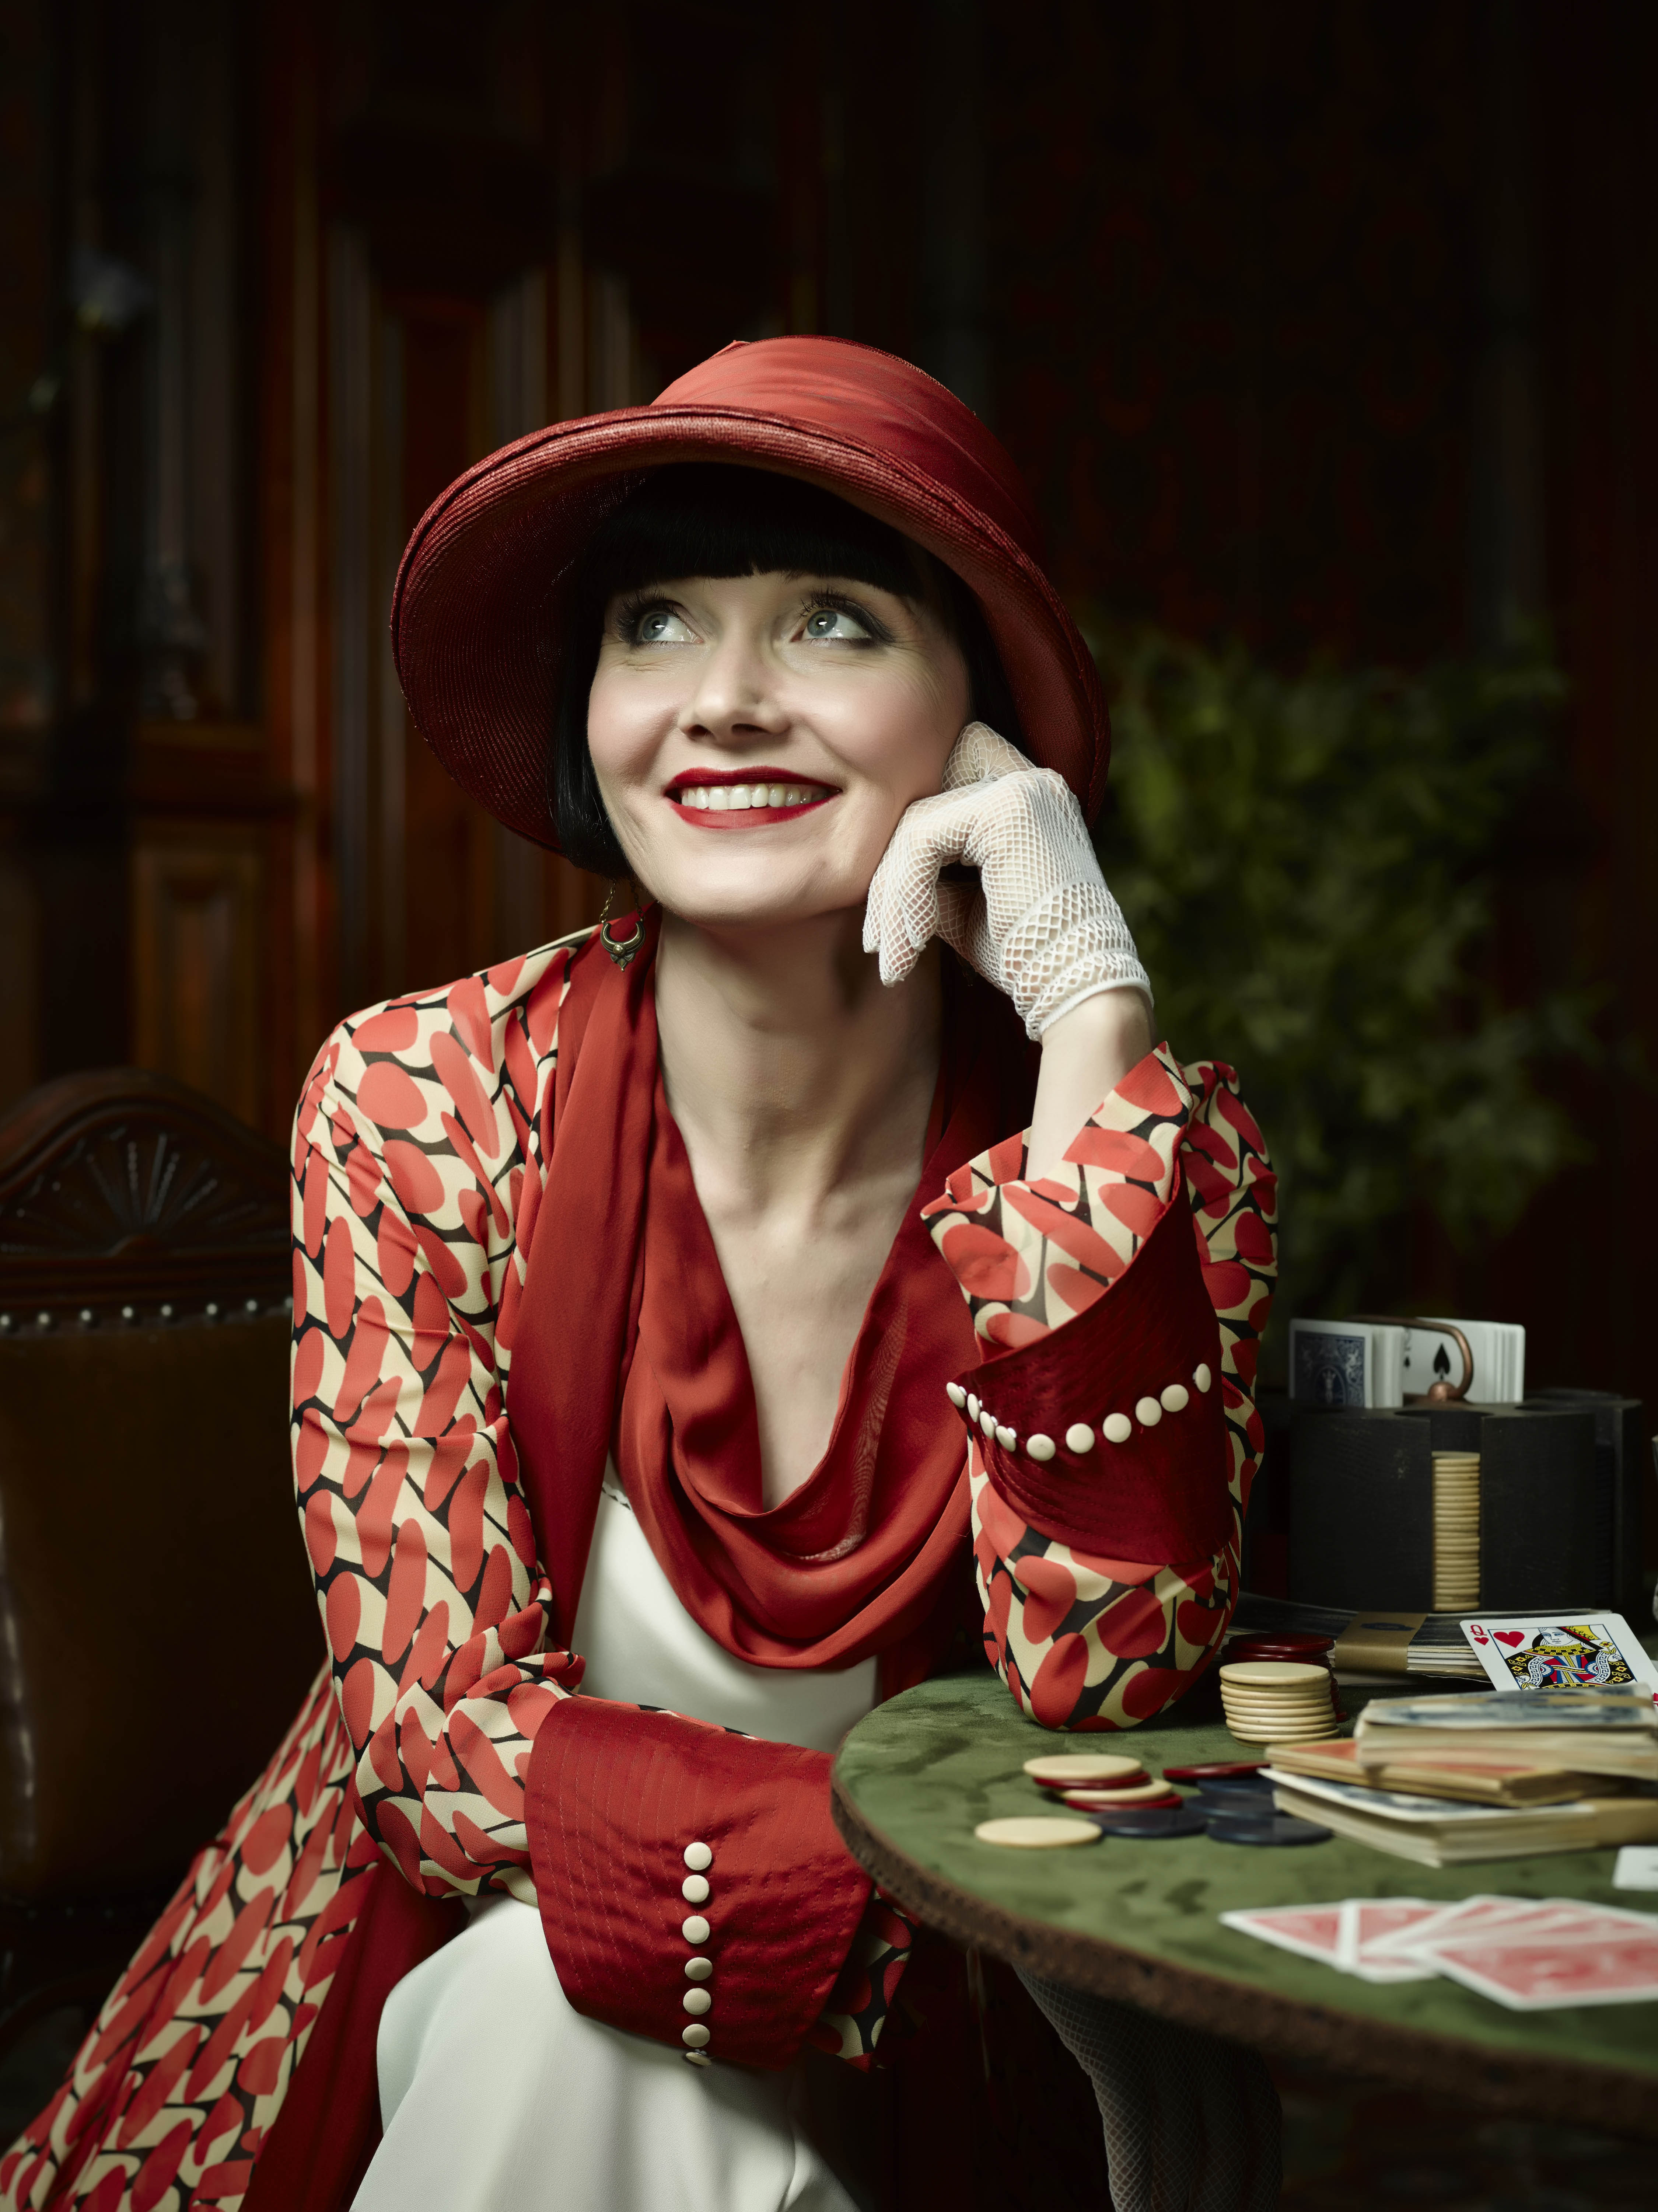 MFMM_S3_Essie Davis as Phryne Fisher + Every Cloud Productions and a3mi (24...